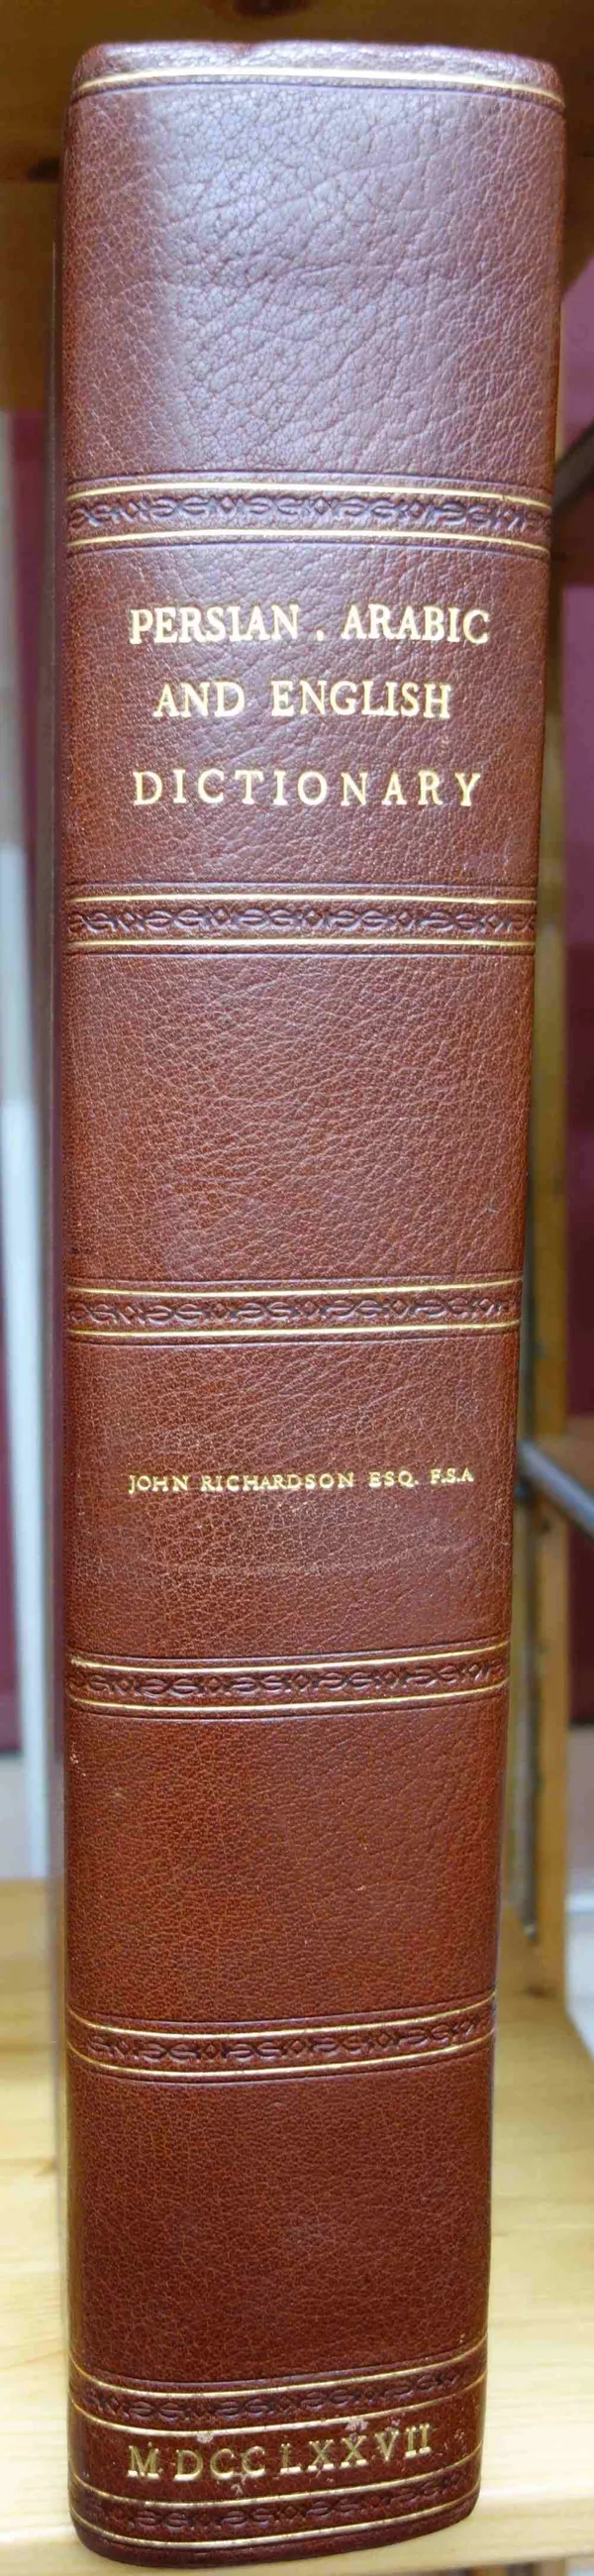 RICHARDSON (J.)  A Dictionary, Persian, Arabic and English. To which is prefixed a Dissertation on the Language, Literature, and Manners of Eastern Na